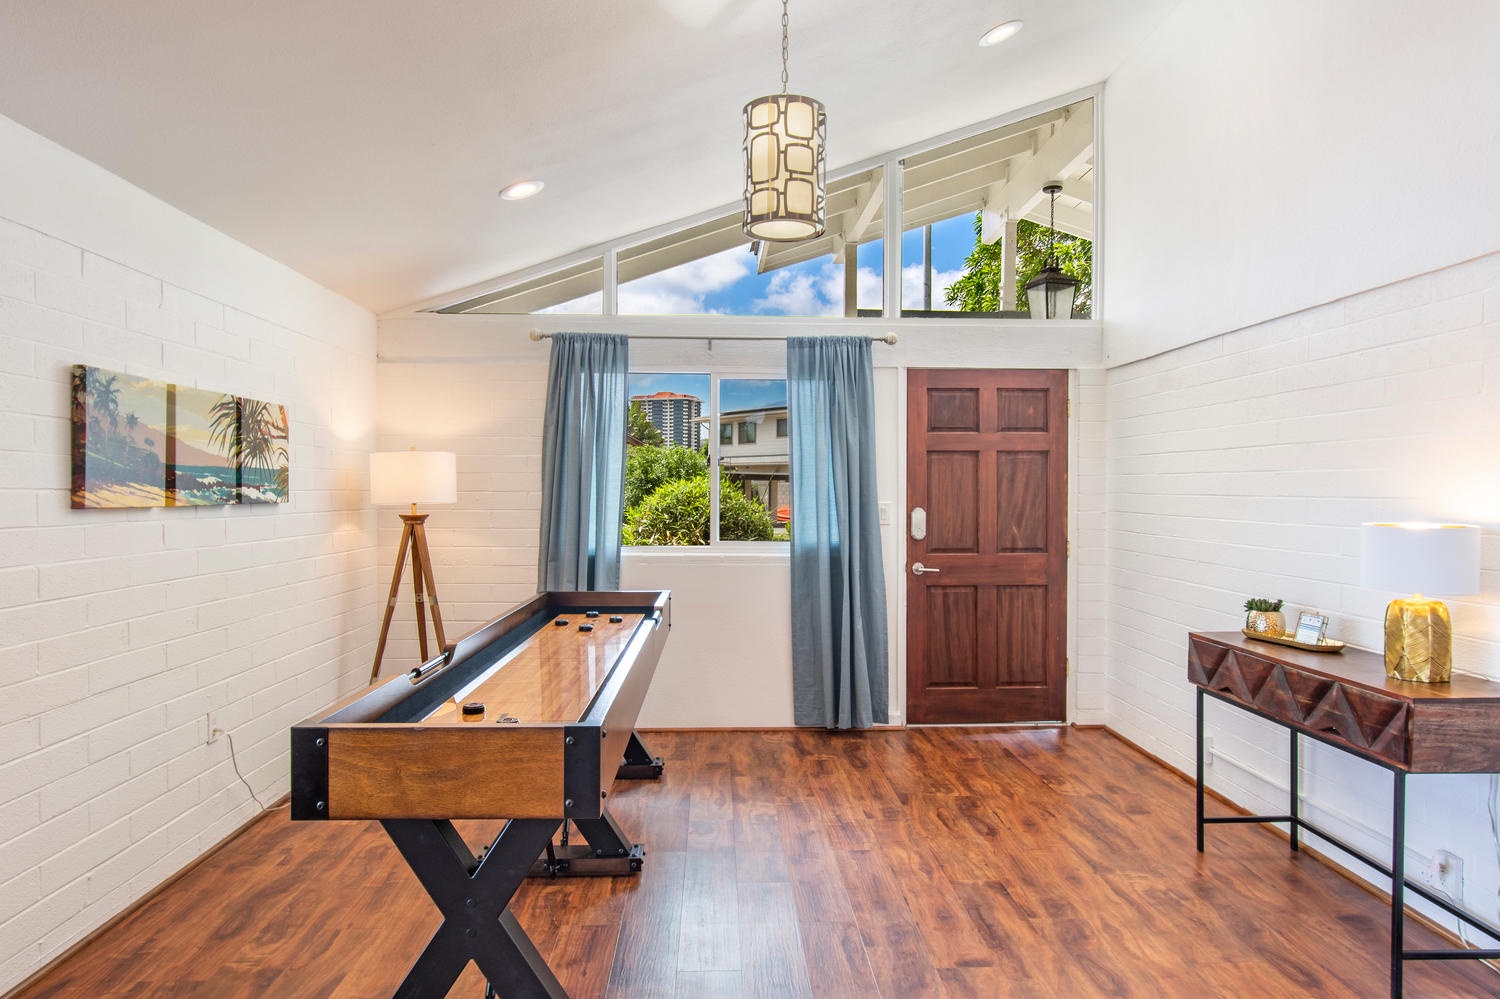 Honolulu Vacation Rentals, Holoholo Hale - Grab a beverage and let the games begin!